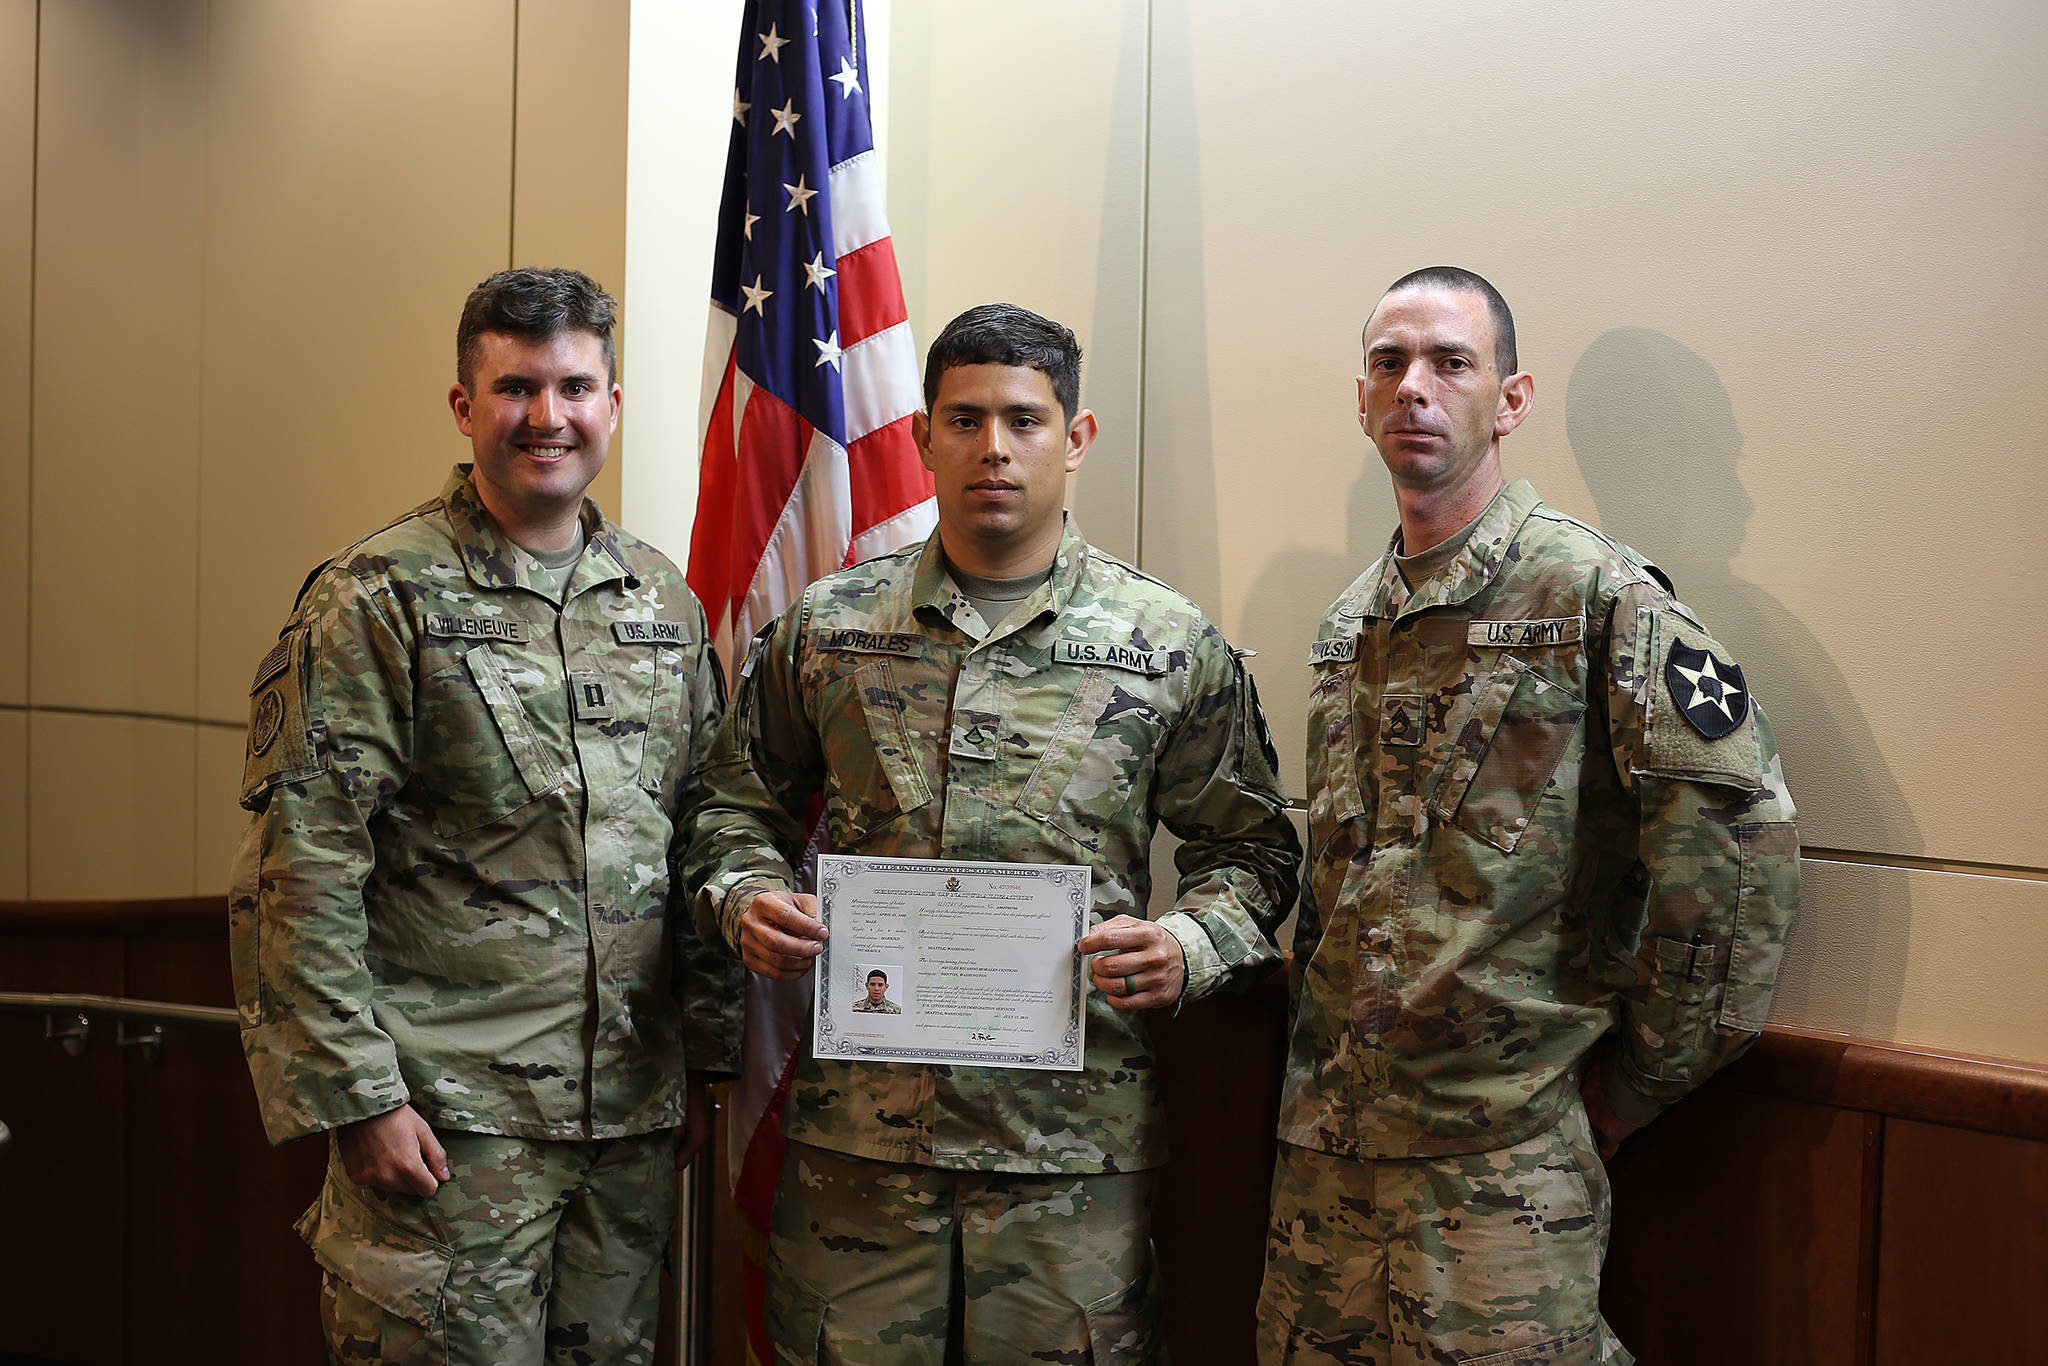 Pvt. 1st Class Aquiles R. Morales Centeno, center, of Headquarters and Headquarters Company, 3rd Battalion, 161st Infantry Regiment, 81st Stryker Brigade Combat Team, poses for a photo with his company commander, Capt. Jordan Villeneuve, left, and his section leader, Staff Sgt. Jeremiah Olson after reciting the Naturalization Oath of Allegiance to the United States of America to become a naturalized citizen of the U.S. July 17, 2018 in Tukwila. Pfc. Morales is a native of Nicaragua but joined the Washington National Guard with the goal of earning his college degree. COURTESY PHOTO, U.S. Army National Guard, Sgt. 1st Class Jason Kriess.